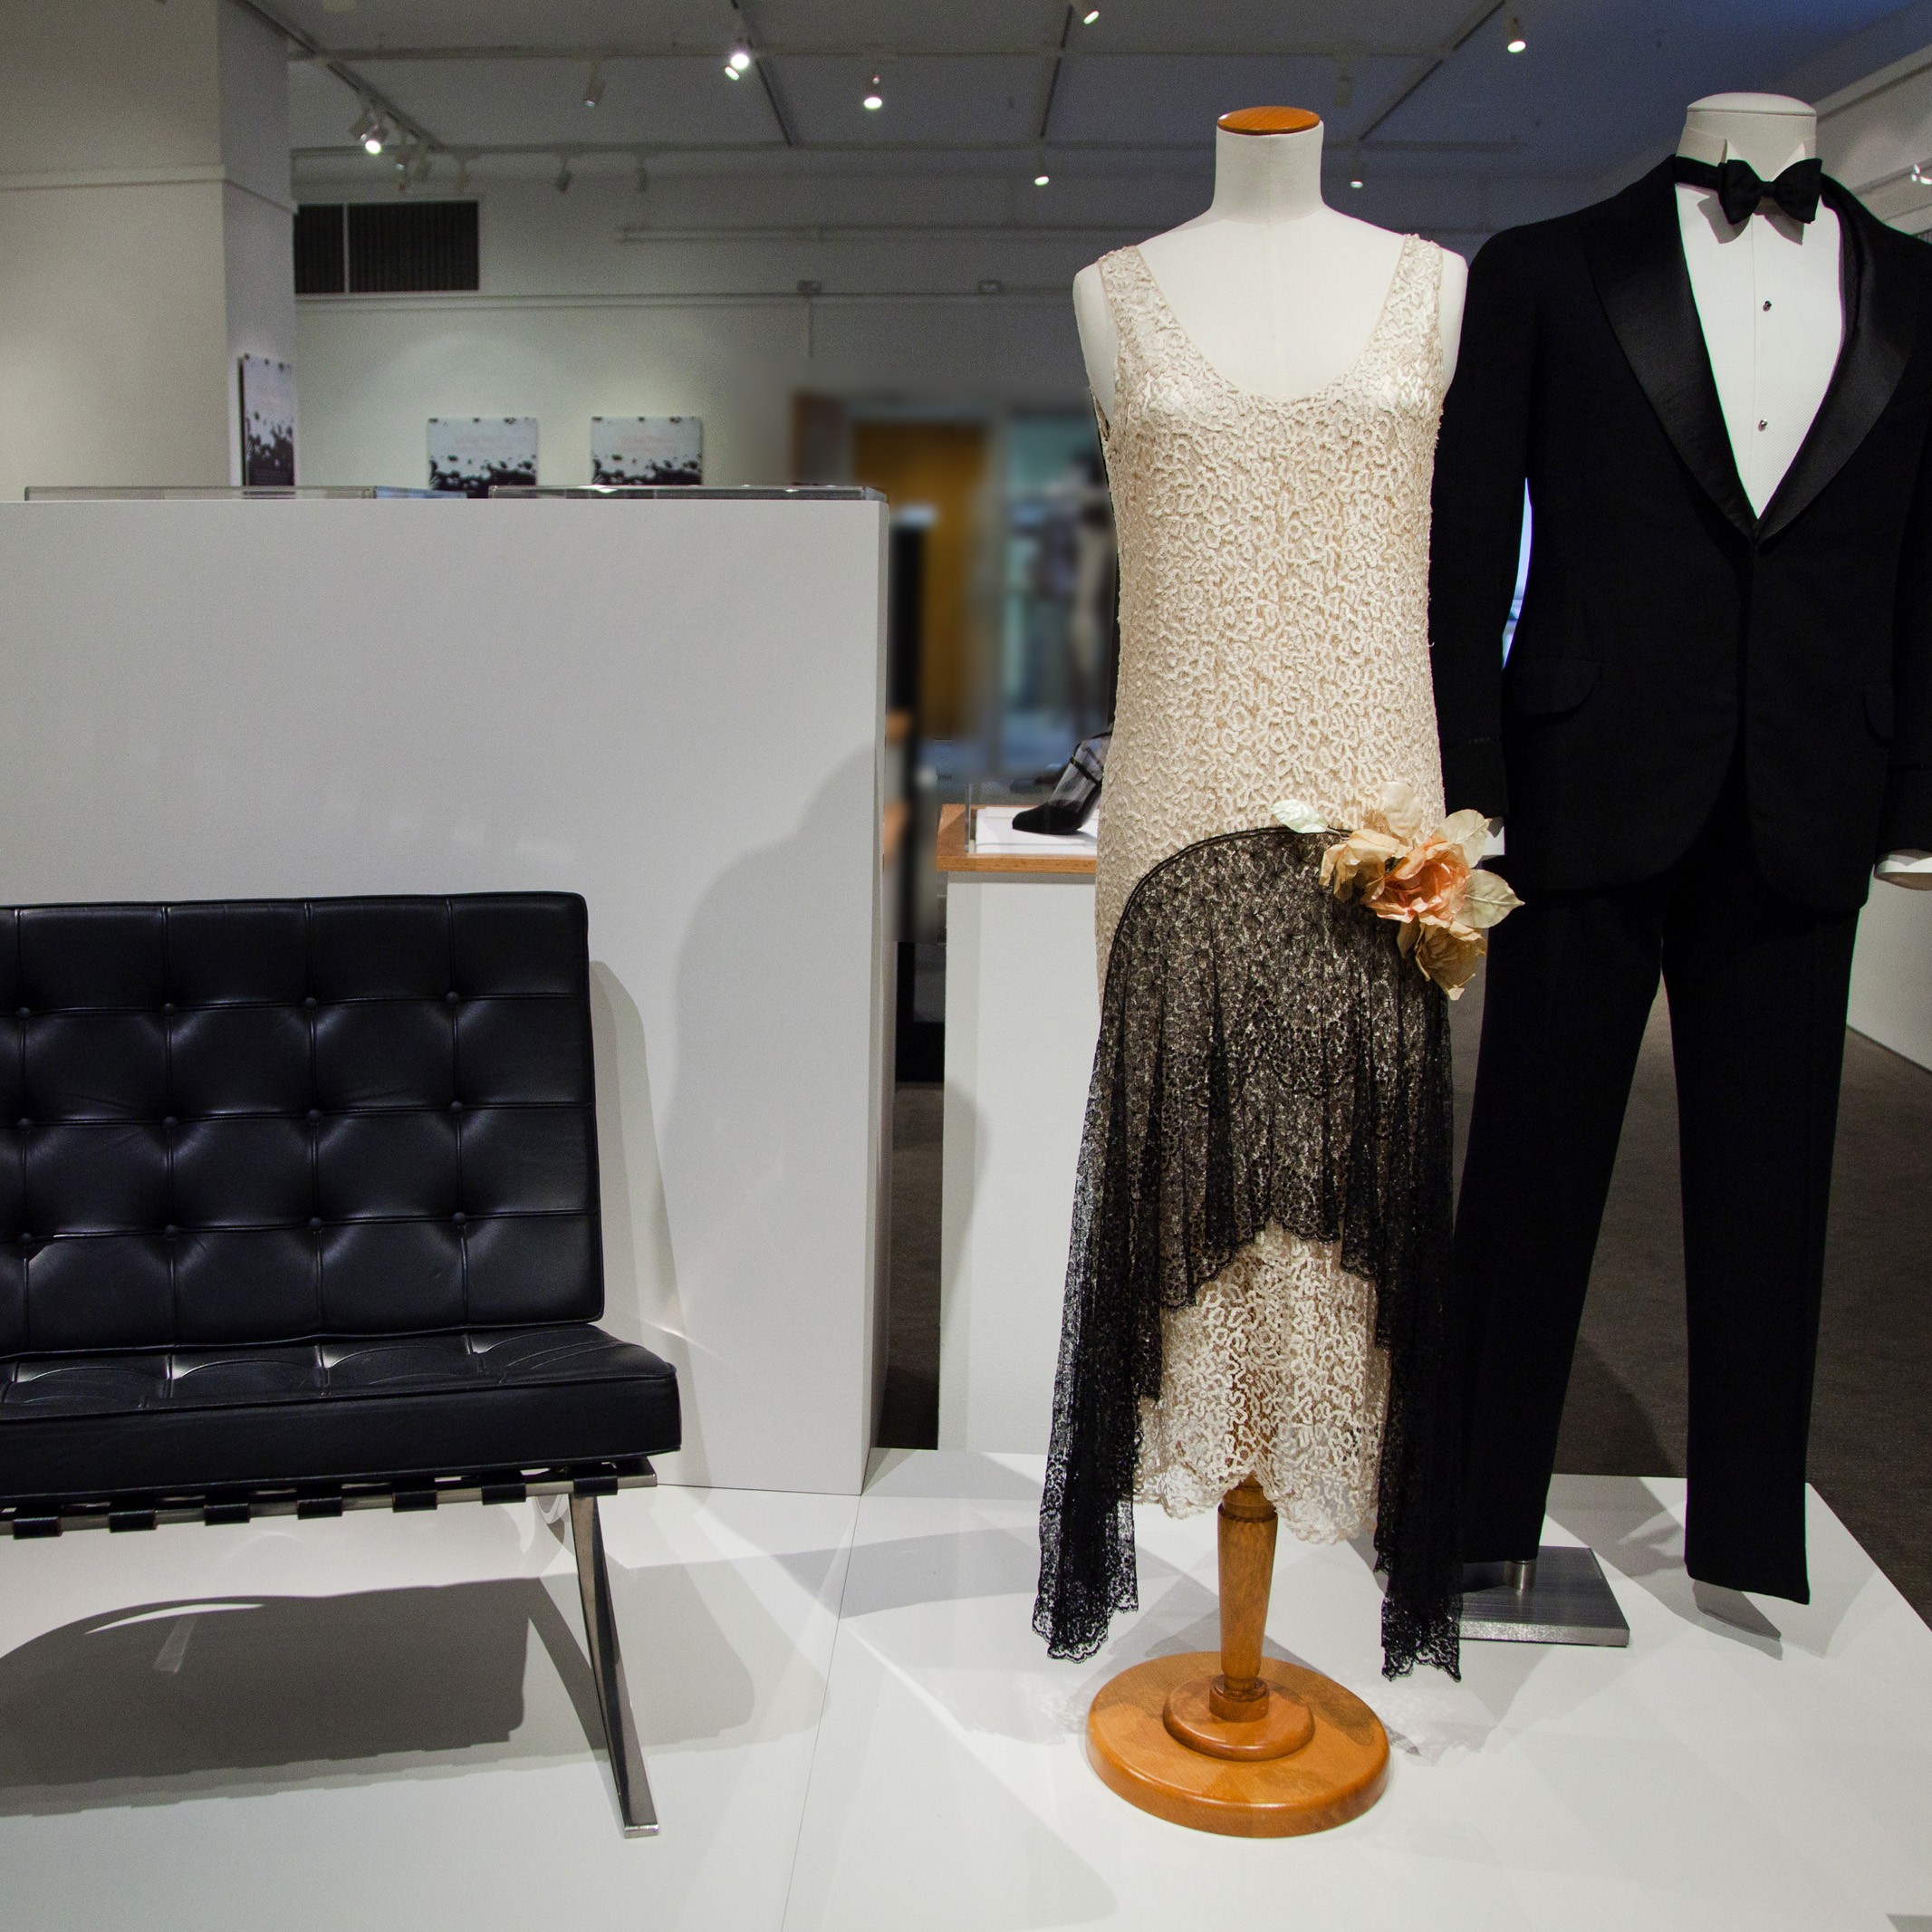 Polarities: Black and White in Design formalwear and an eames chair on display